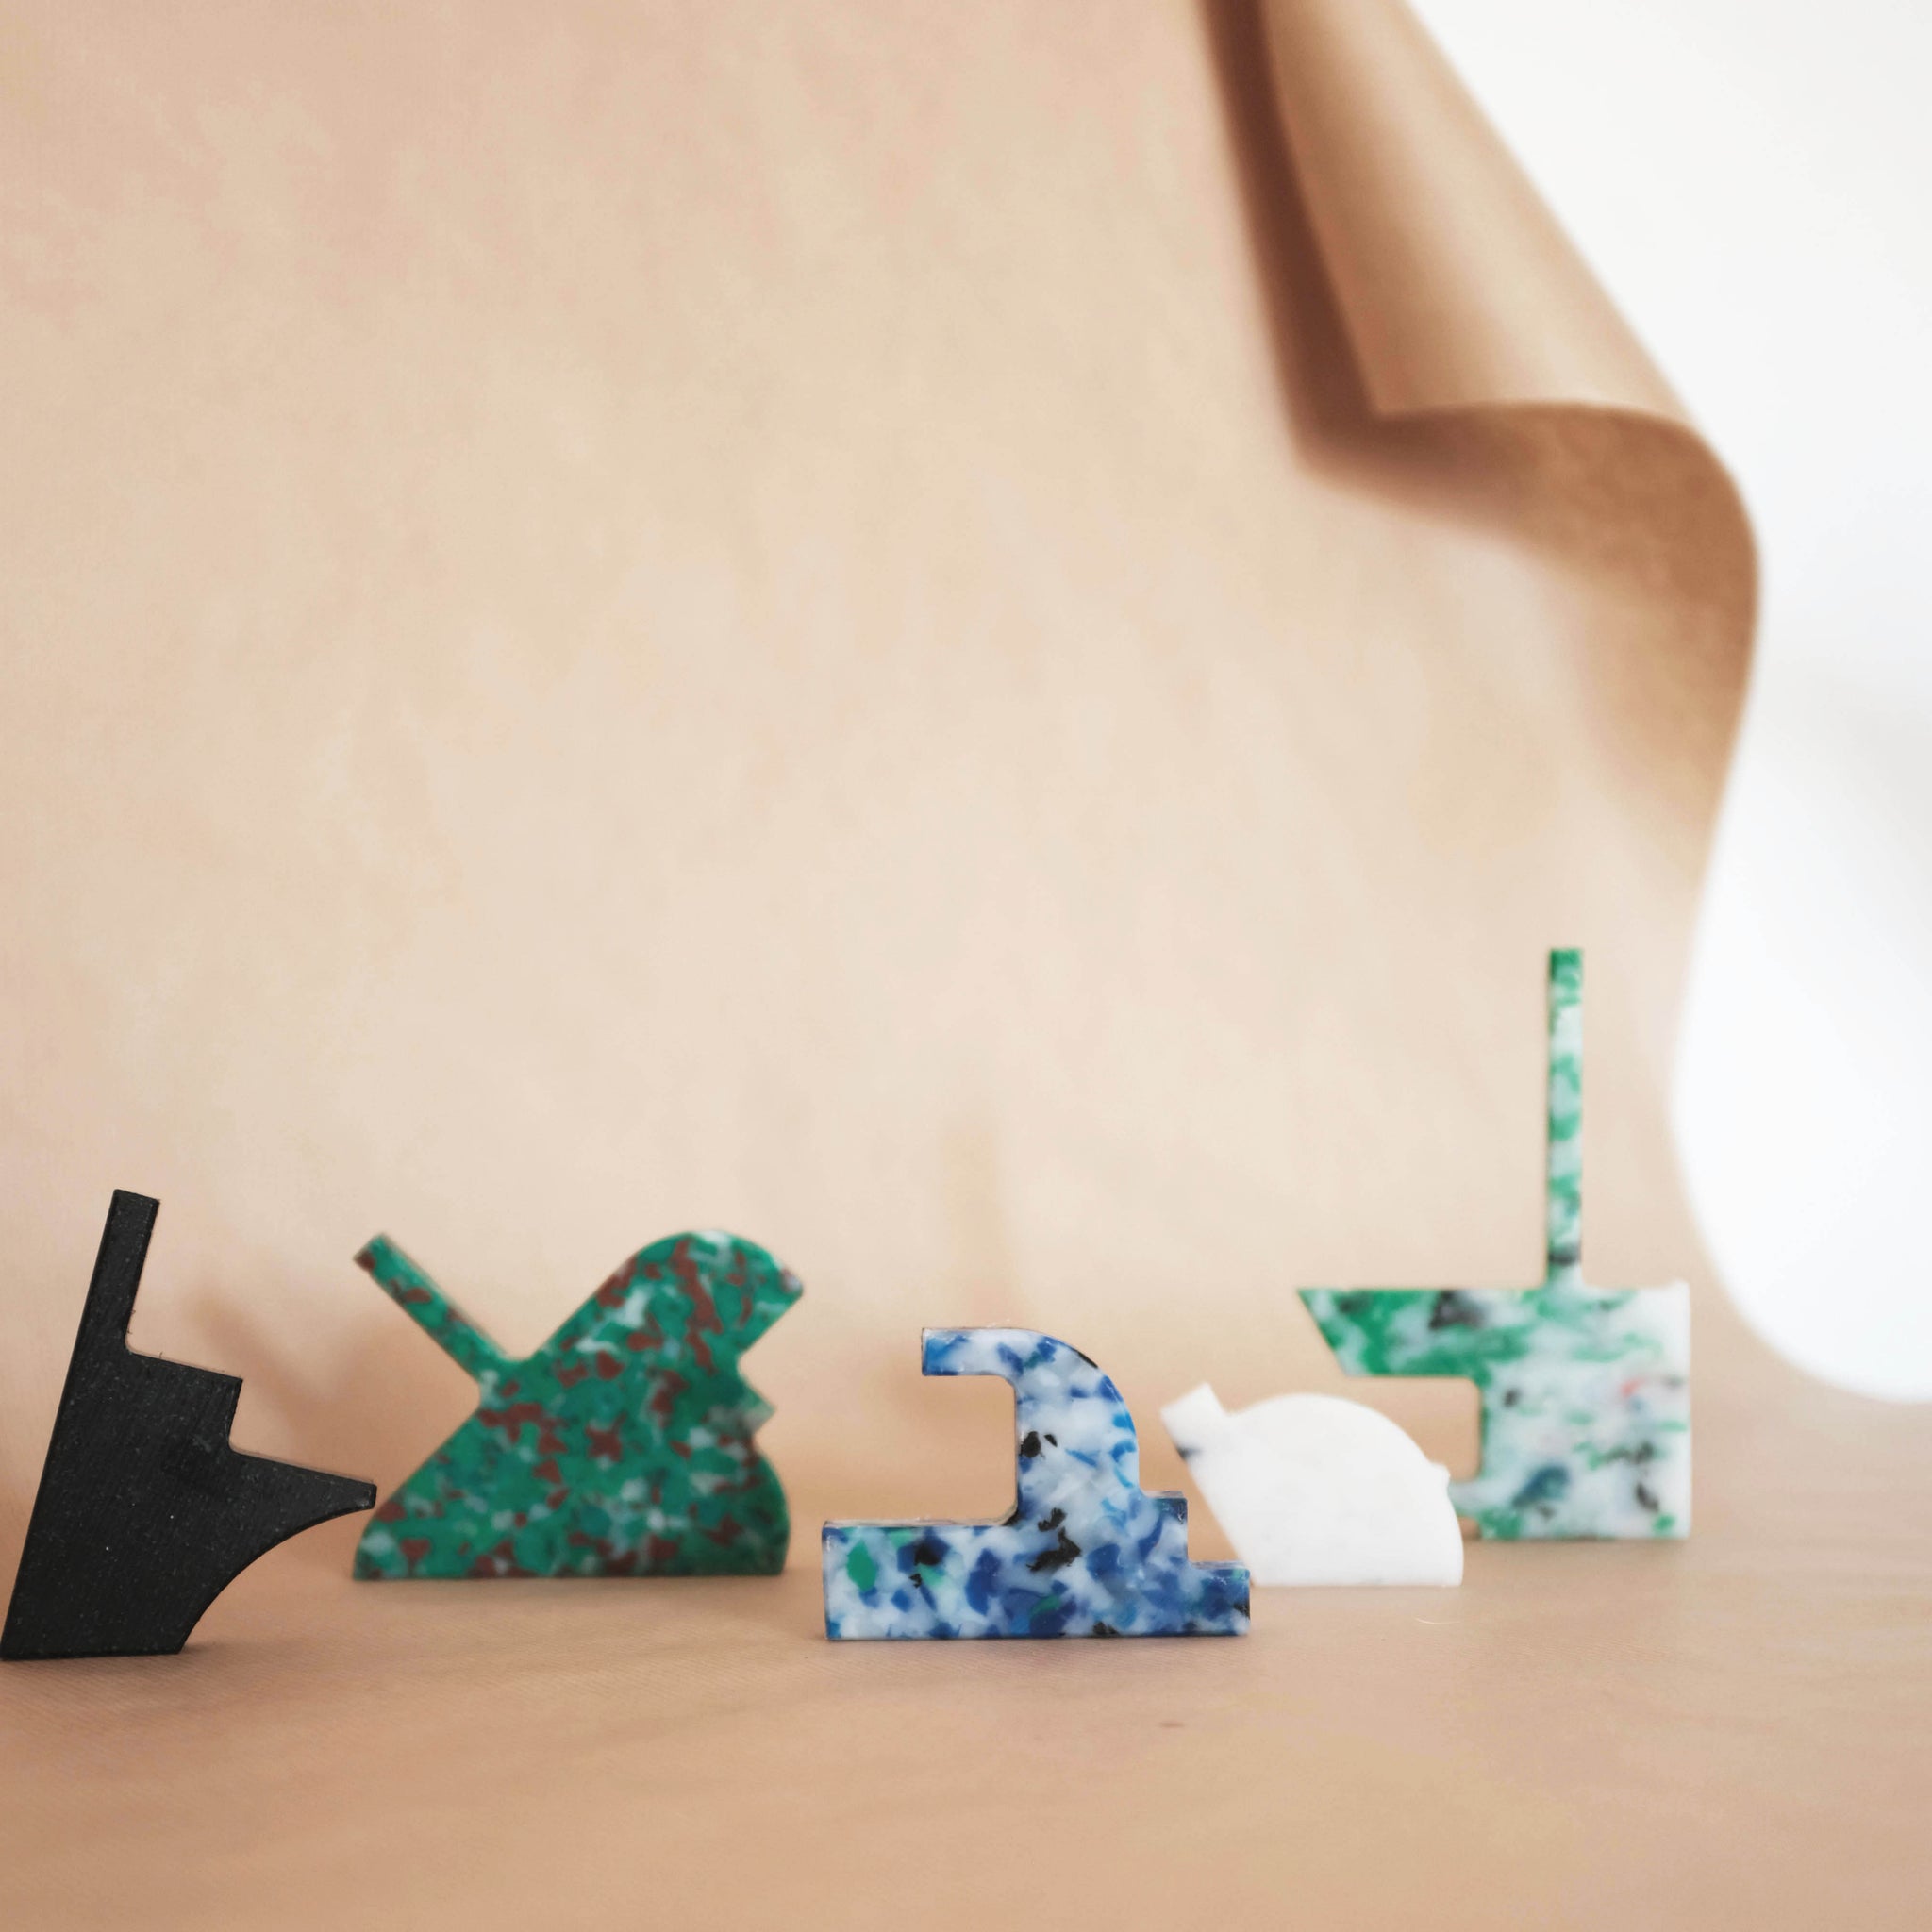 MIXED COLOUR WALL HOOKS FROM RANDOM PRODUCTION CUT OFFS BY THE MINIMONO PROJECT - BRAND FOR ECO FRIENDLY - PLAYFUL - MULTI FUNCTIONAL - SUSTAINABLE - HIGH QUALITY - DESIGN FURNITURE FROM RECYCLED PLASTIC FOR BOTH ADULT AND CHILDREN MADE IN BERLIN GERMANY